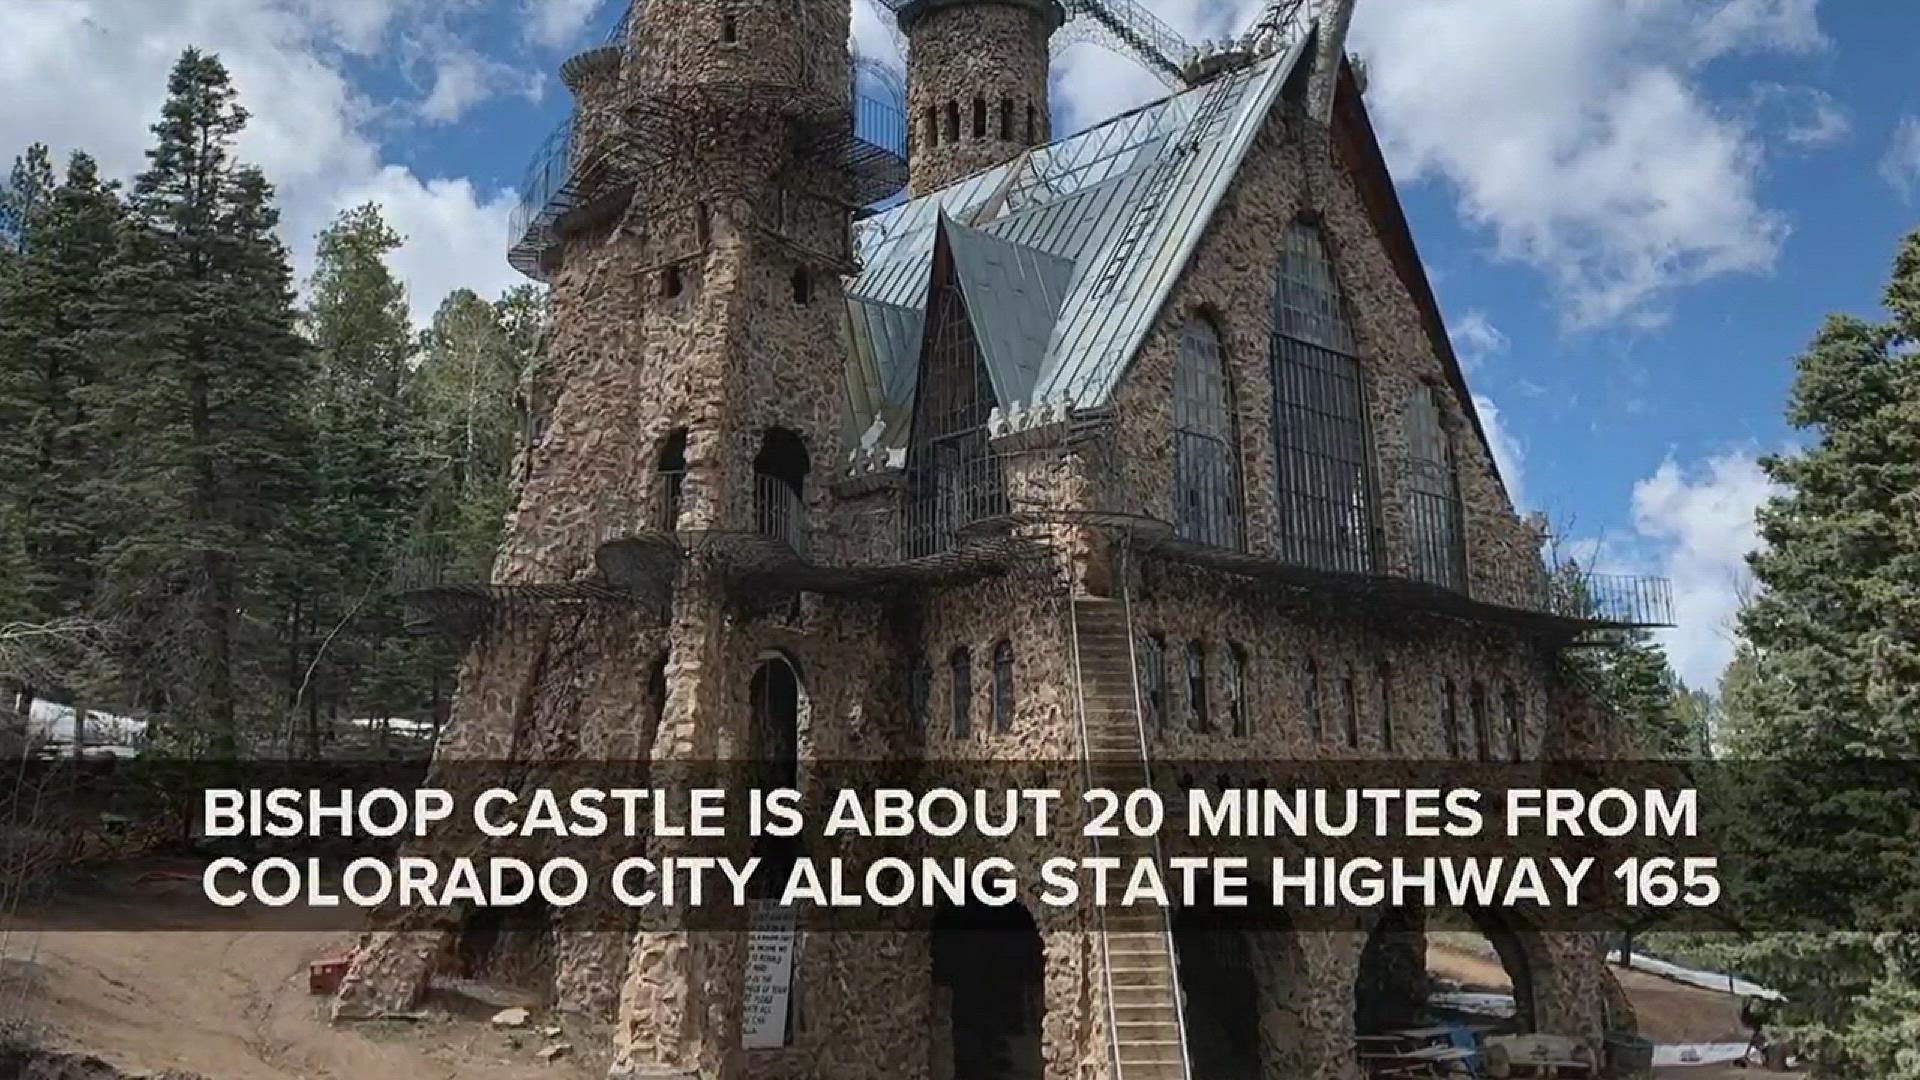 The castle started with a teenager’s vision in 1969 and the money he made mowing lawns. Now, it has become an attraction visited by people across the globe.